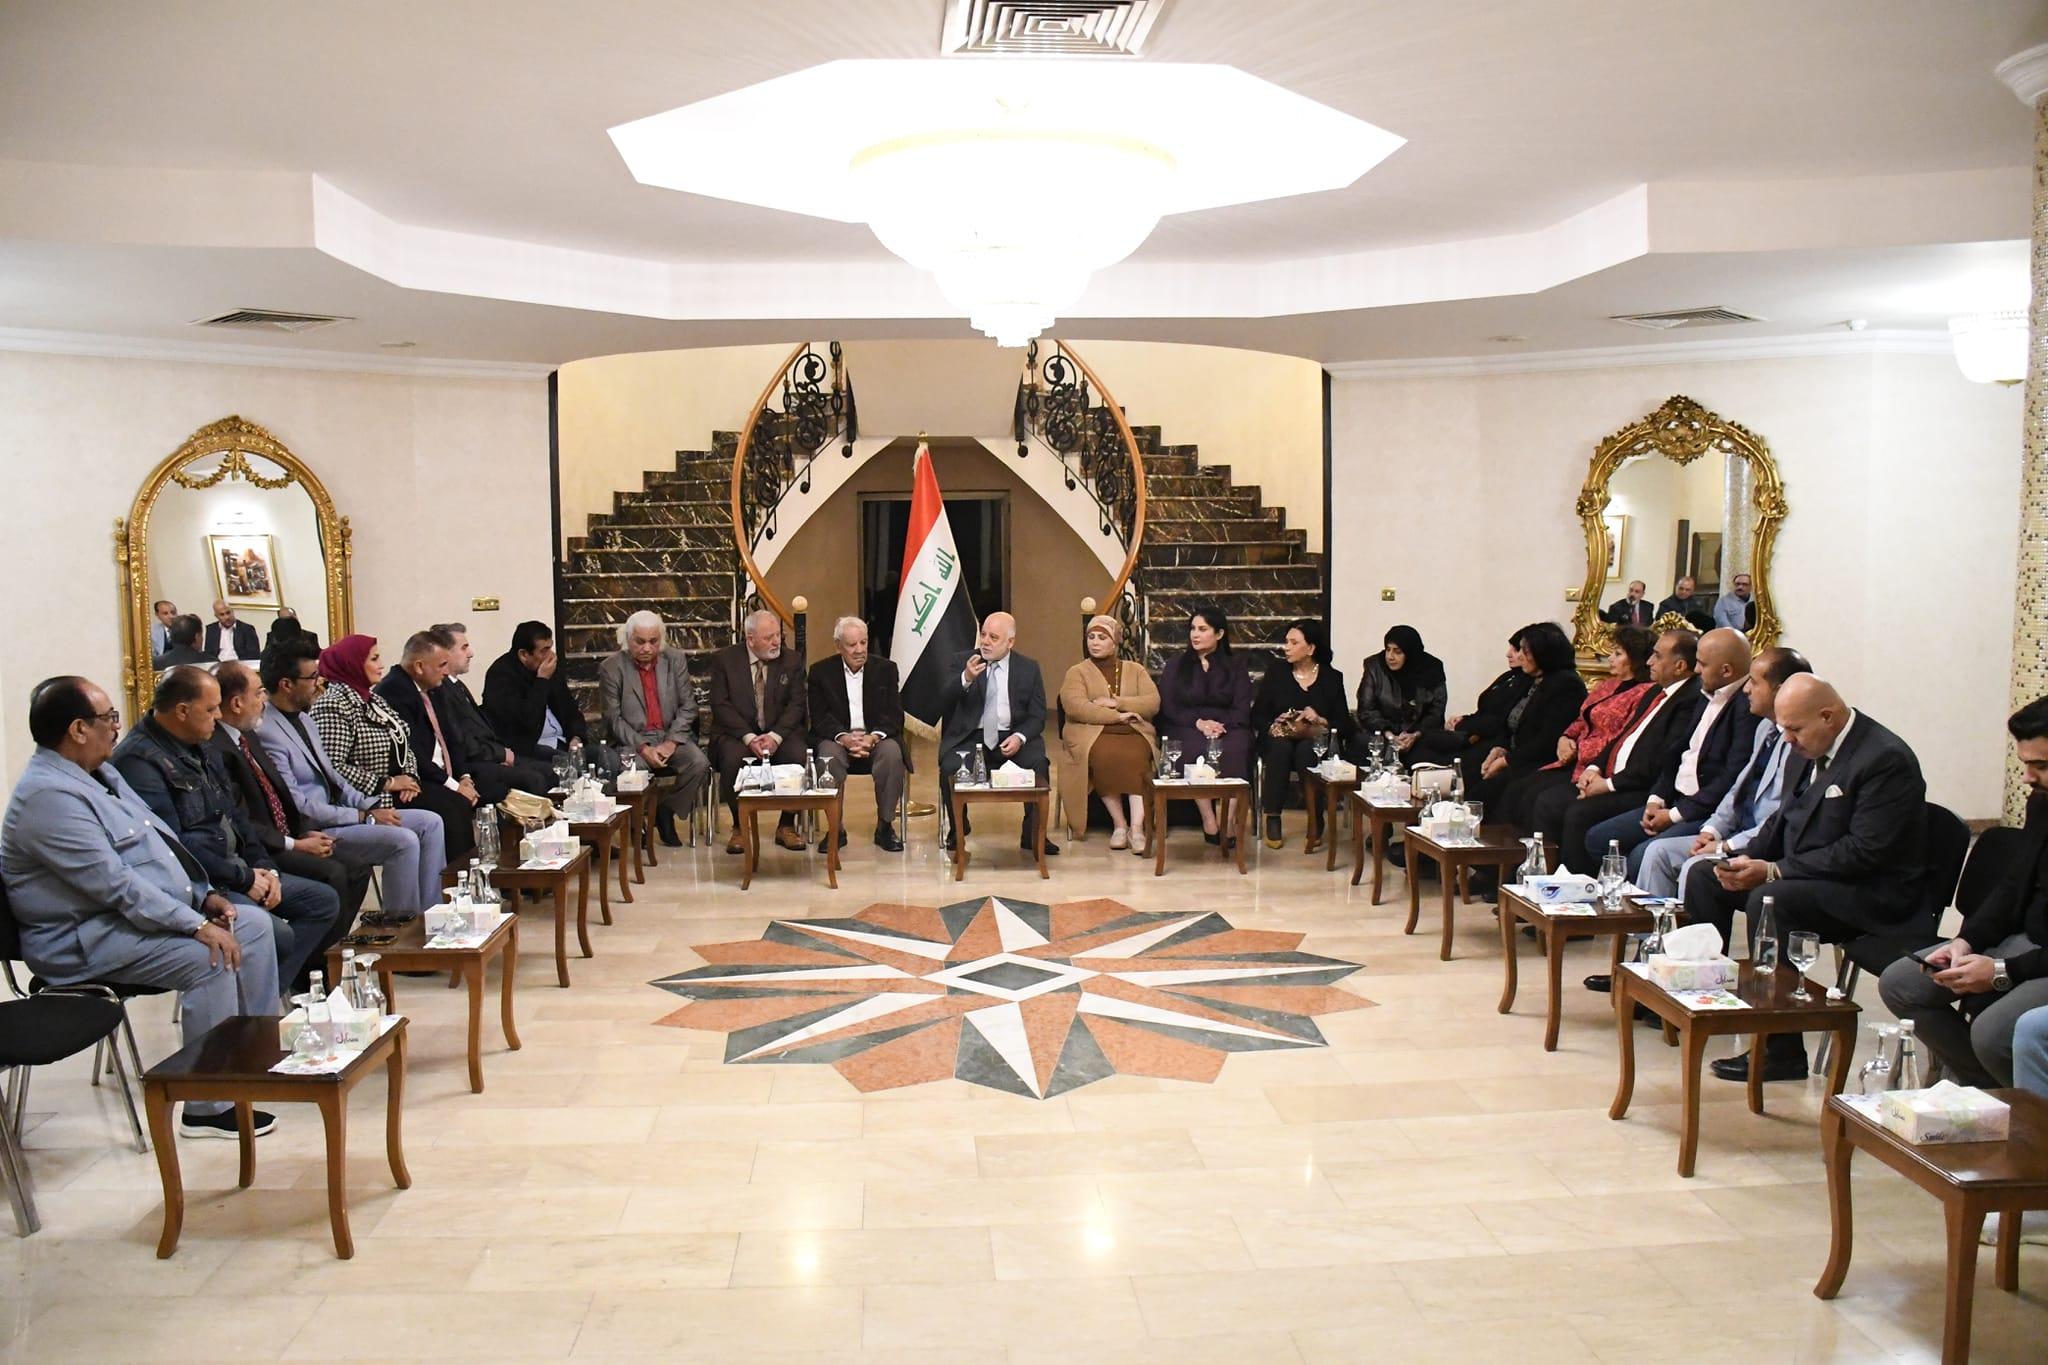 Dr. Al-Abadi hosts an elite group of artists and confirms the positive impact of art on peace and community education